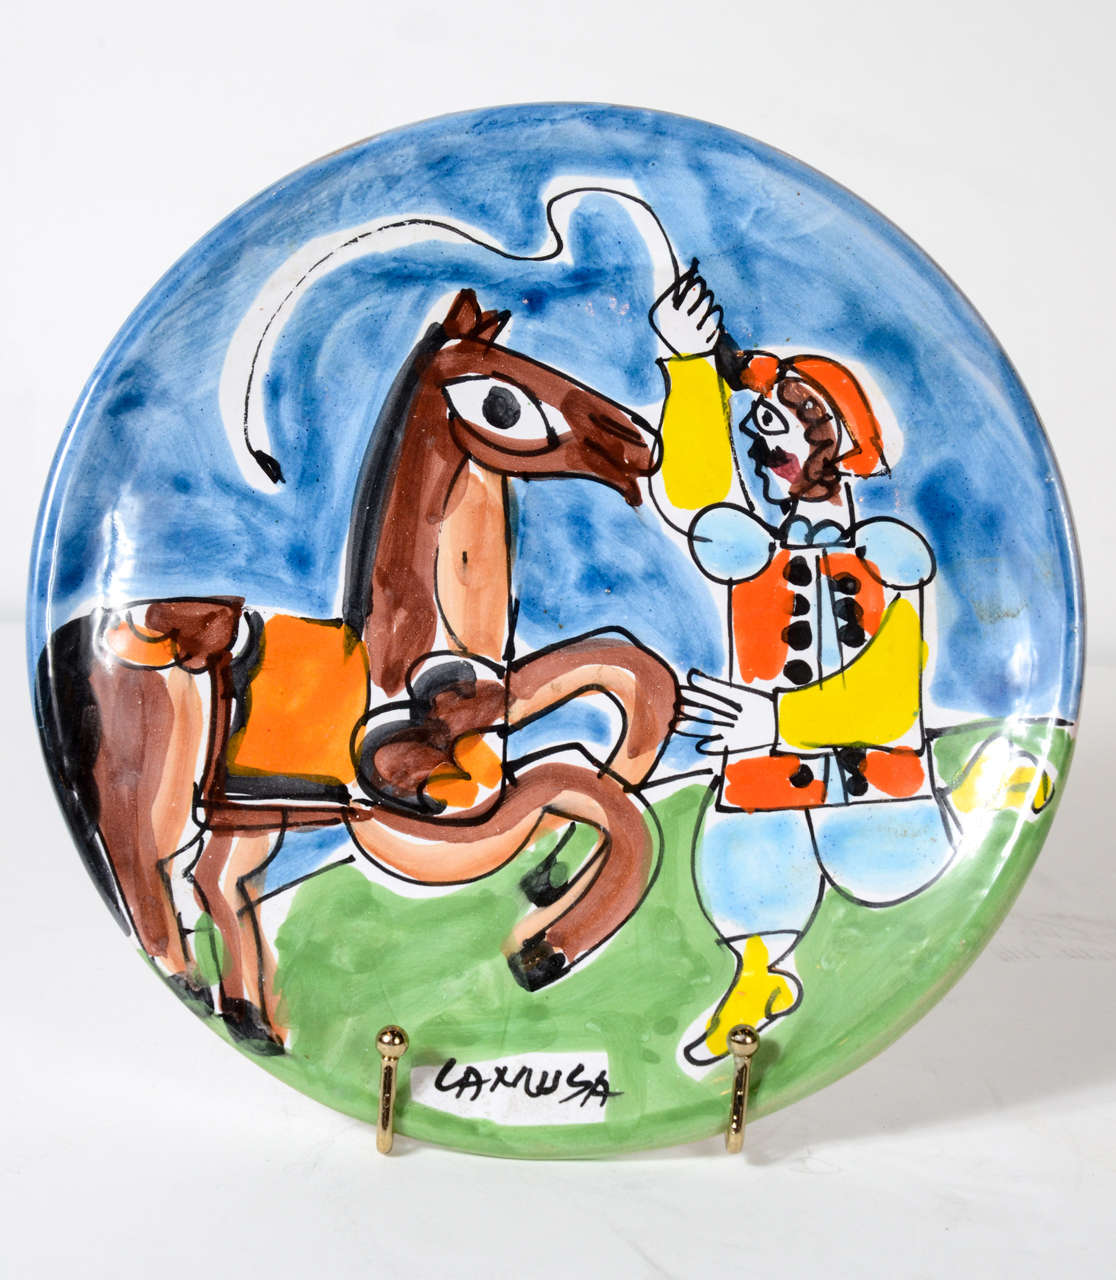 Hand painted Picasso style art pottery plate from La Musa pottery of Italy. Vivid, bright colors. Titled: Carnivale
La Musa opened in 1949. This plate is in the 1960's whimsical style made popular at that time by Giovanni Desimone and Pablo